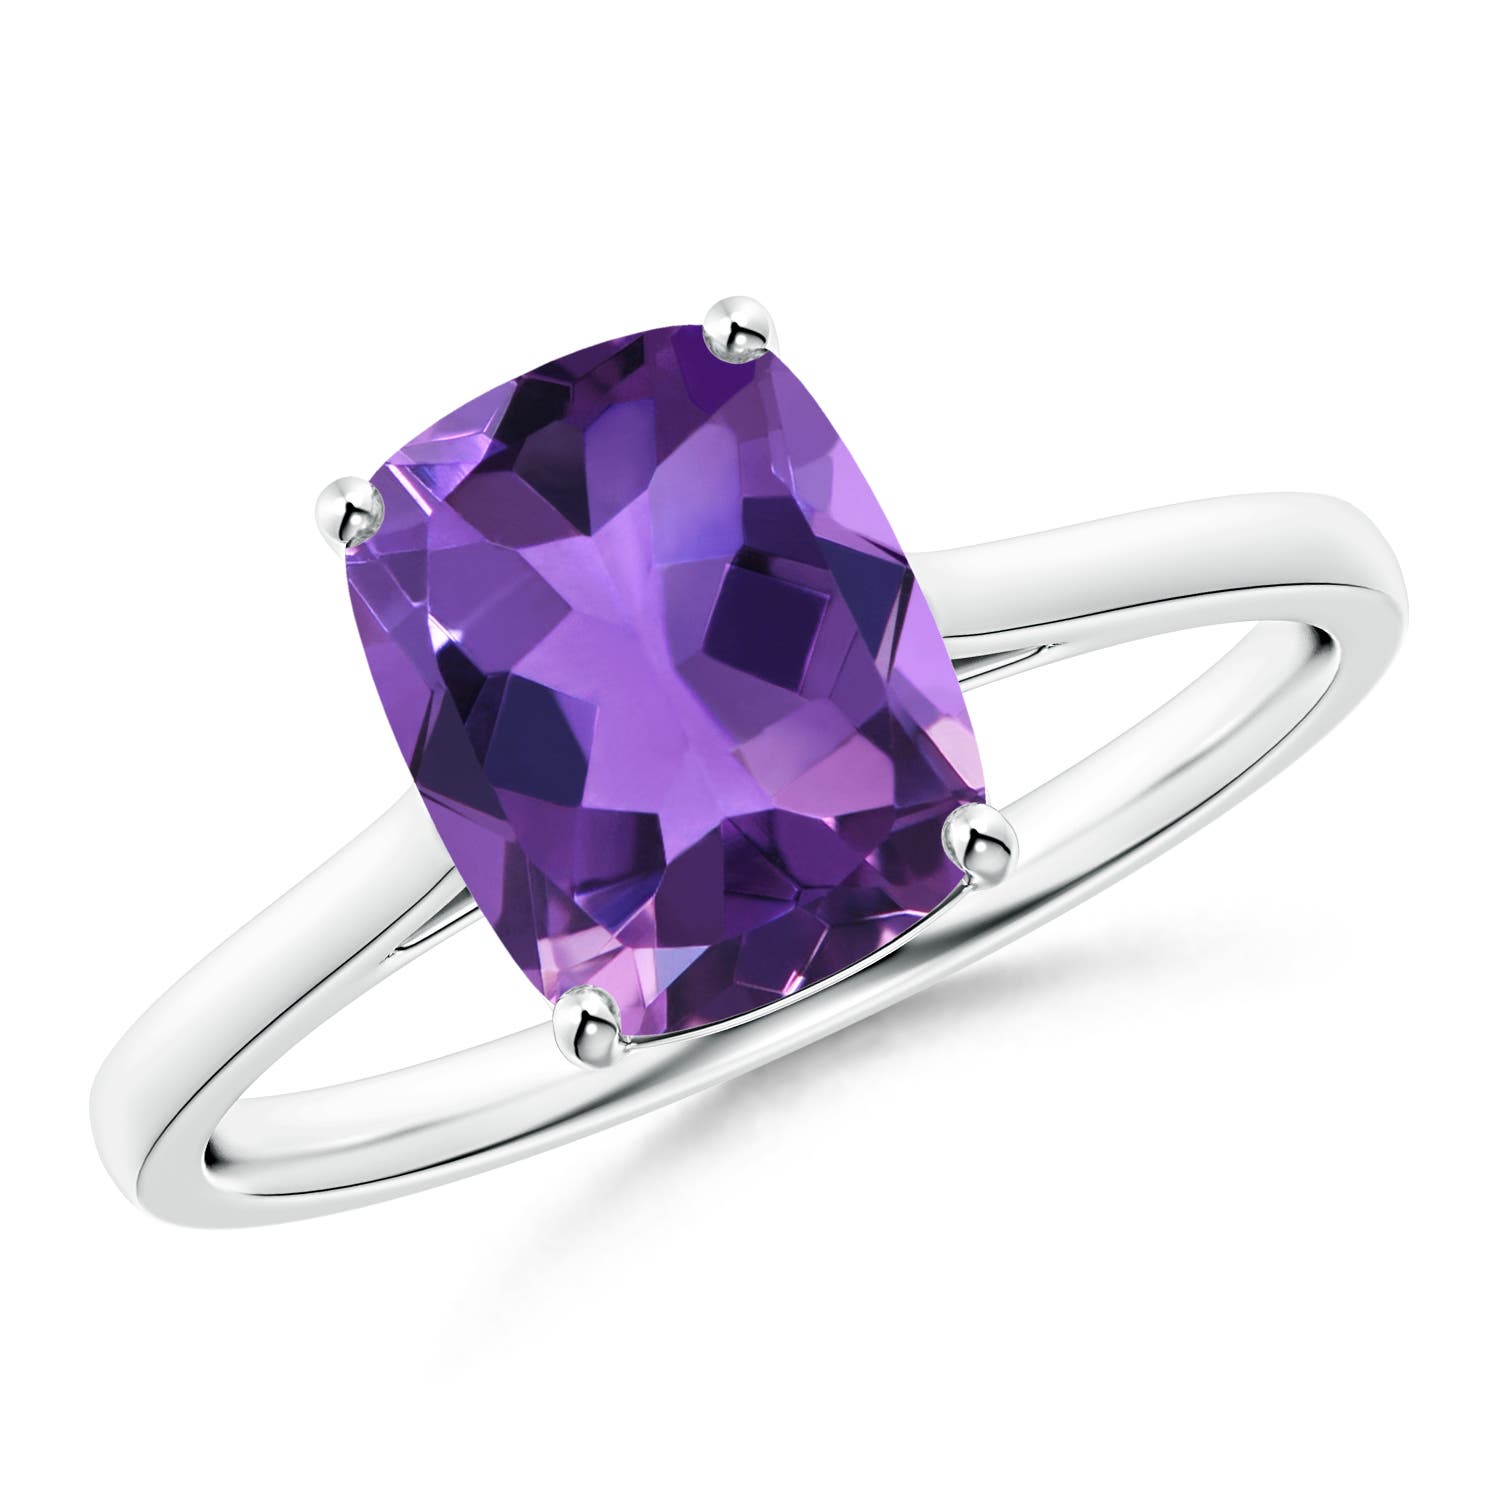 AAA - Amethyst / 2 CT / 14 KT White Gold